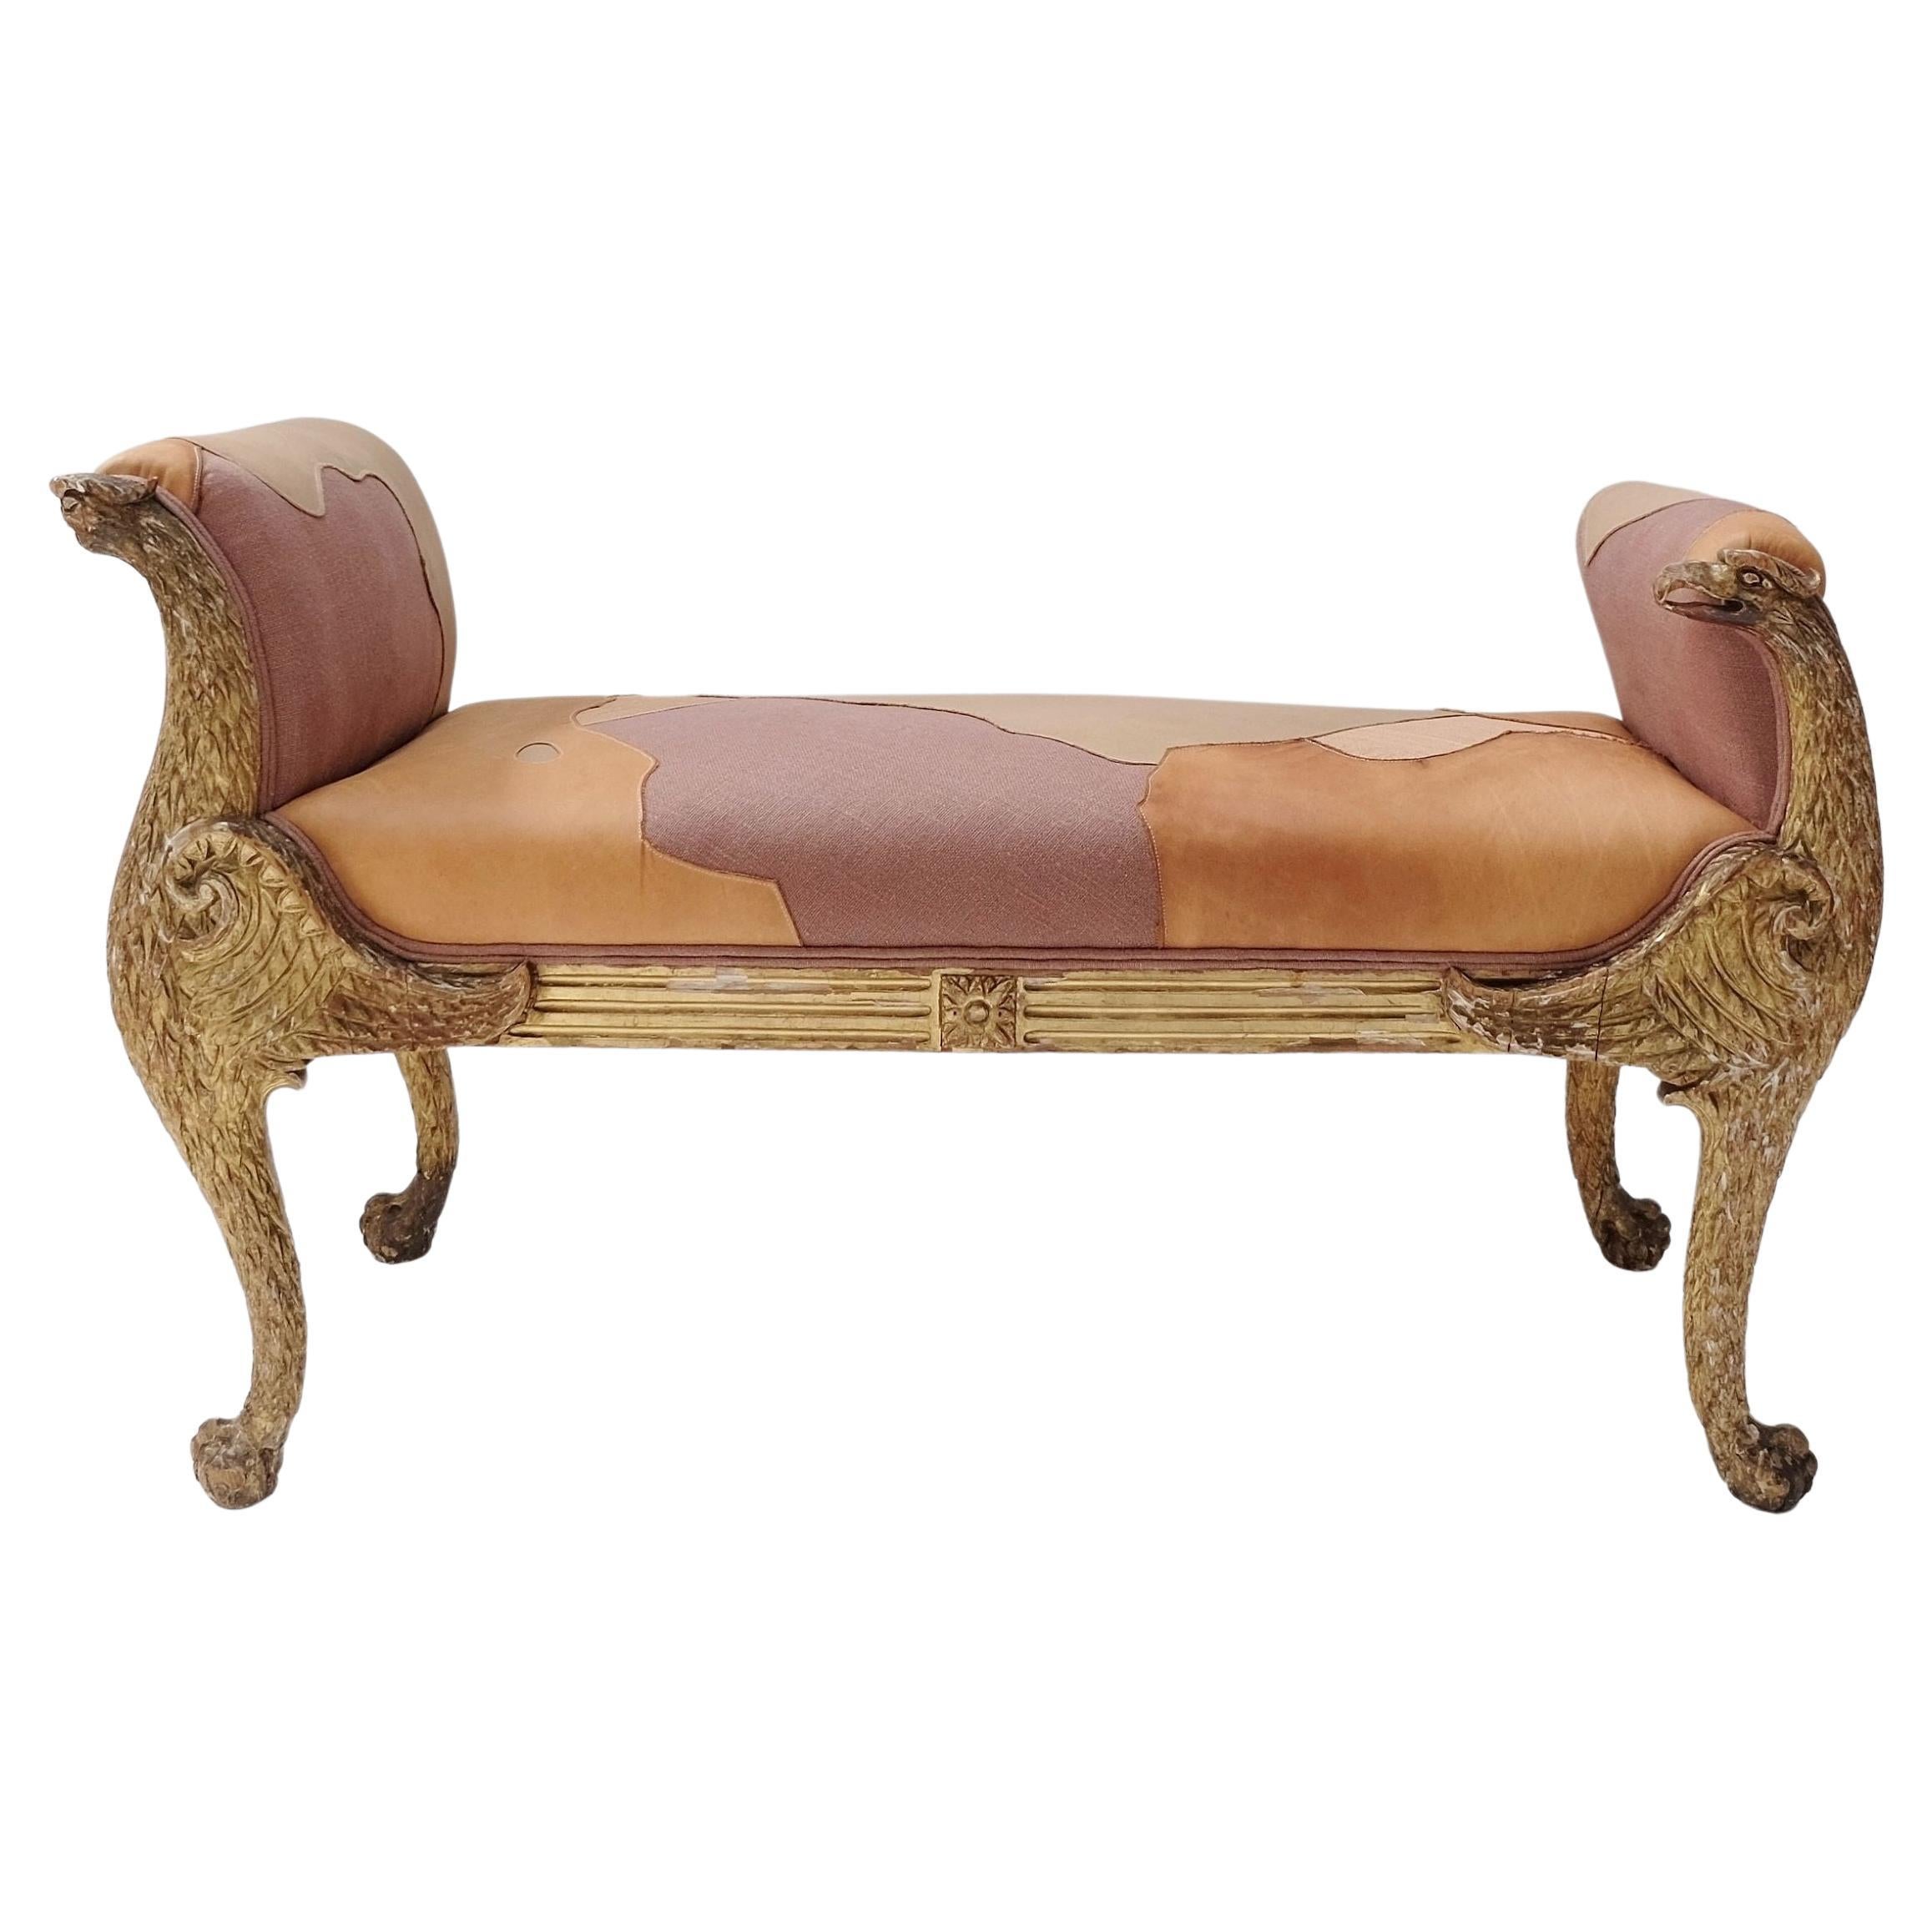 Antique Empire Style Gilded Scroll Arm Window Bench with Winged Eagle Supports For Sale